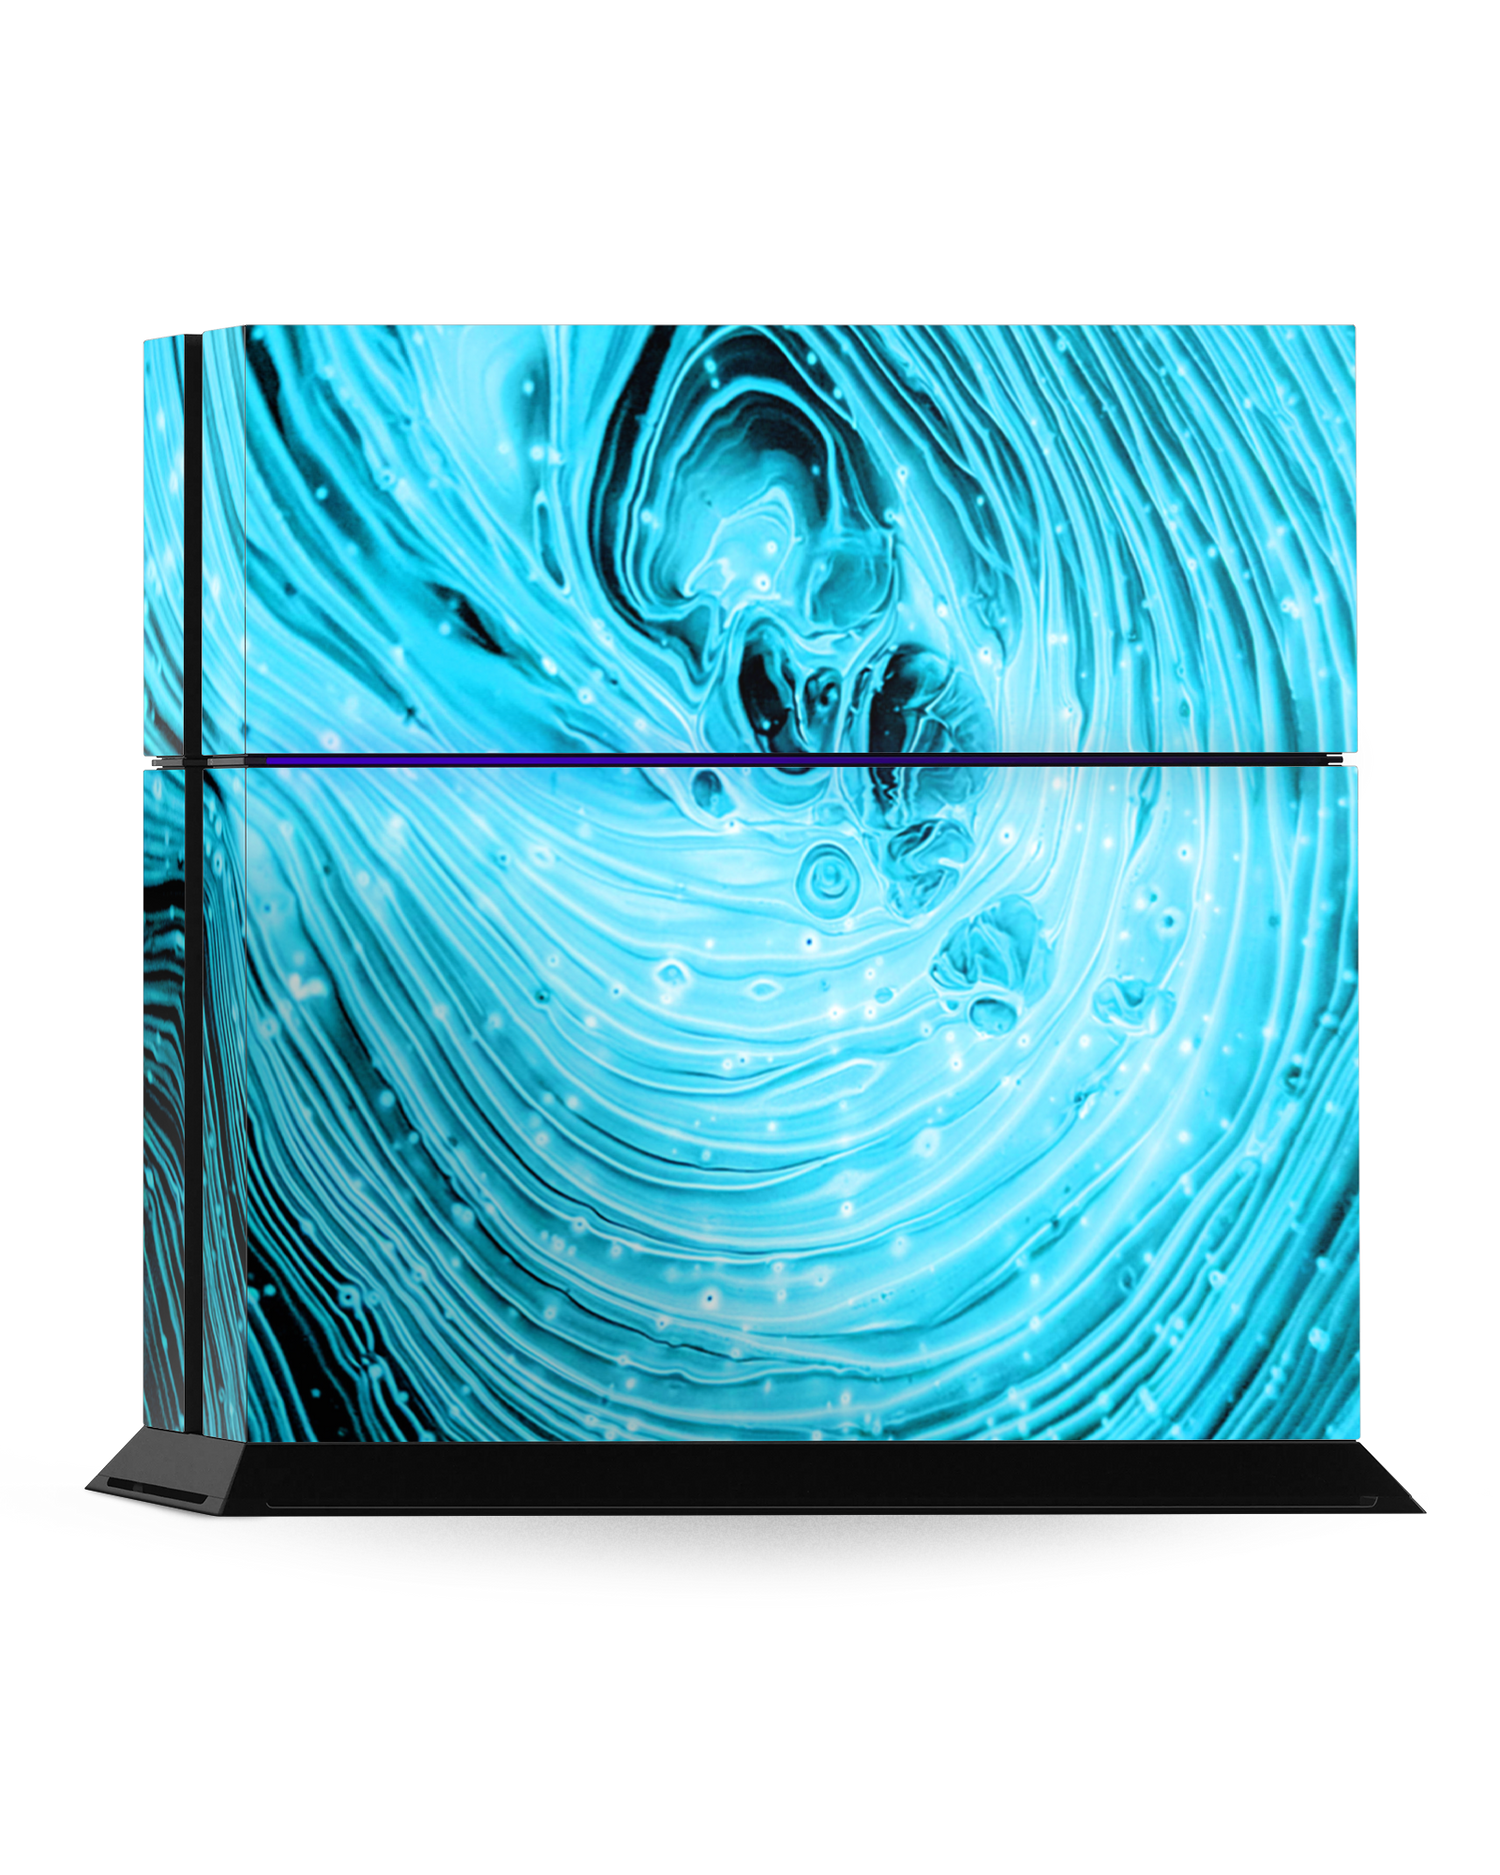 Turquoise Ripples Console Skin for Sony PlayStation 4: Standing